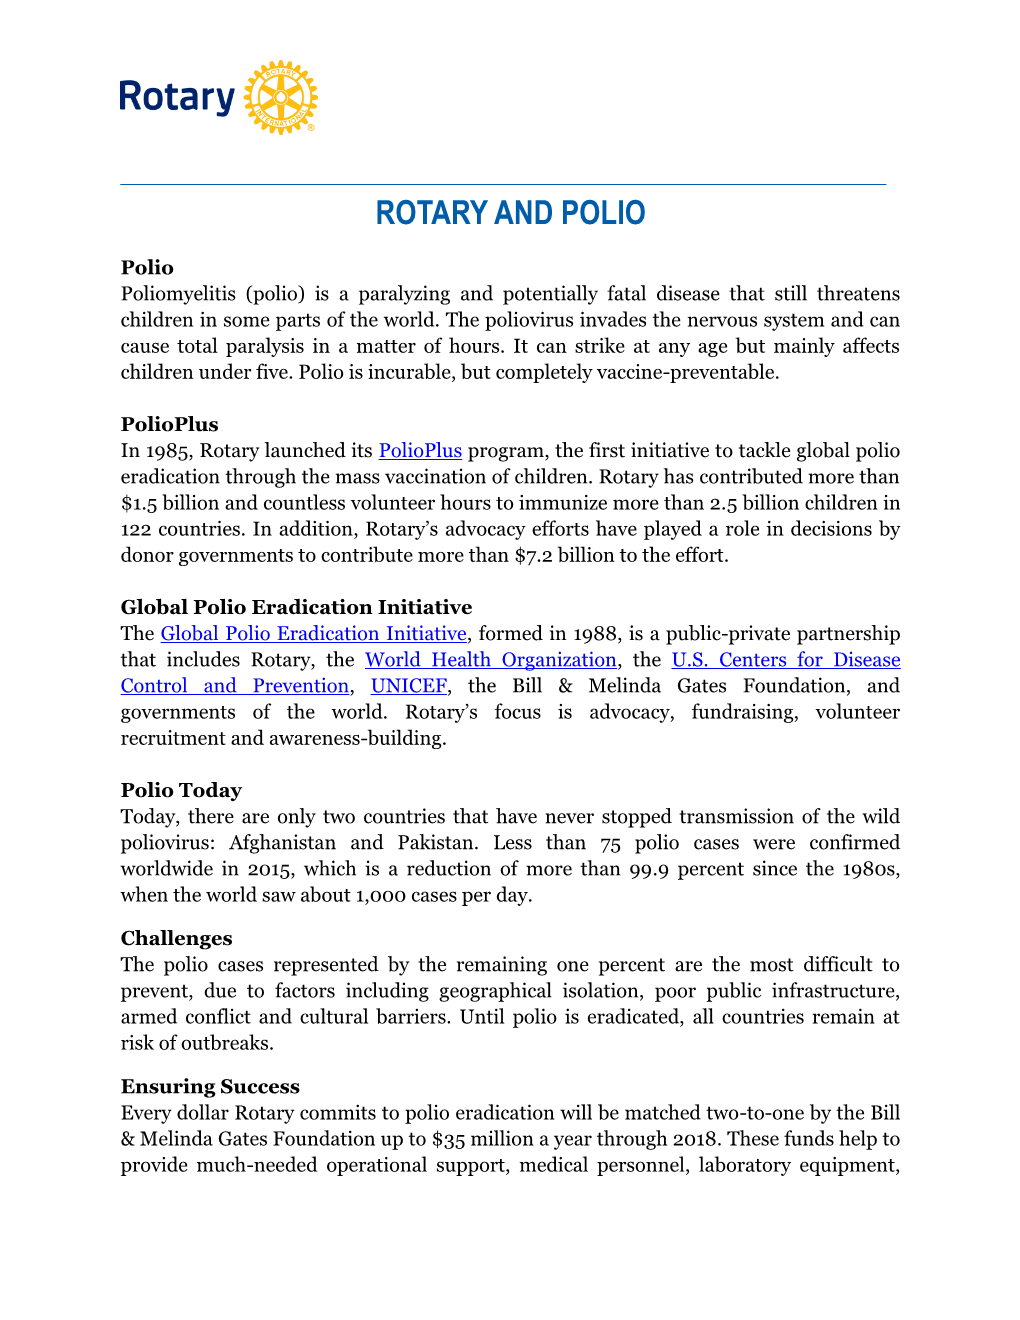 Rotary and Polio Factsheet